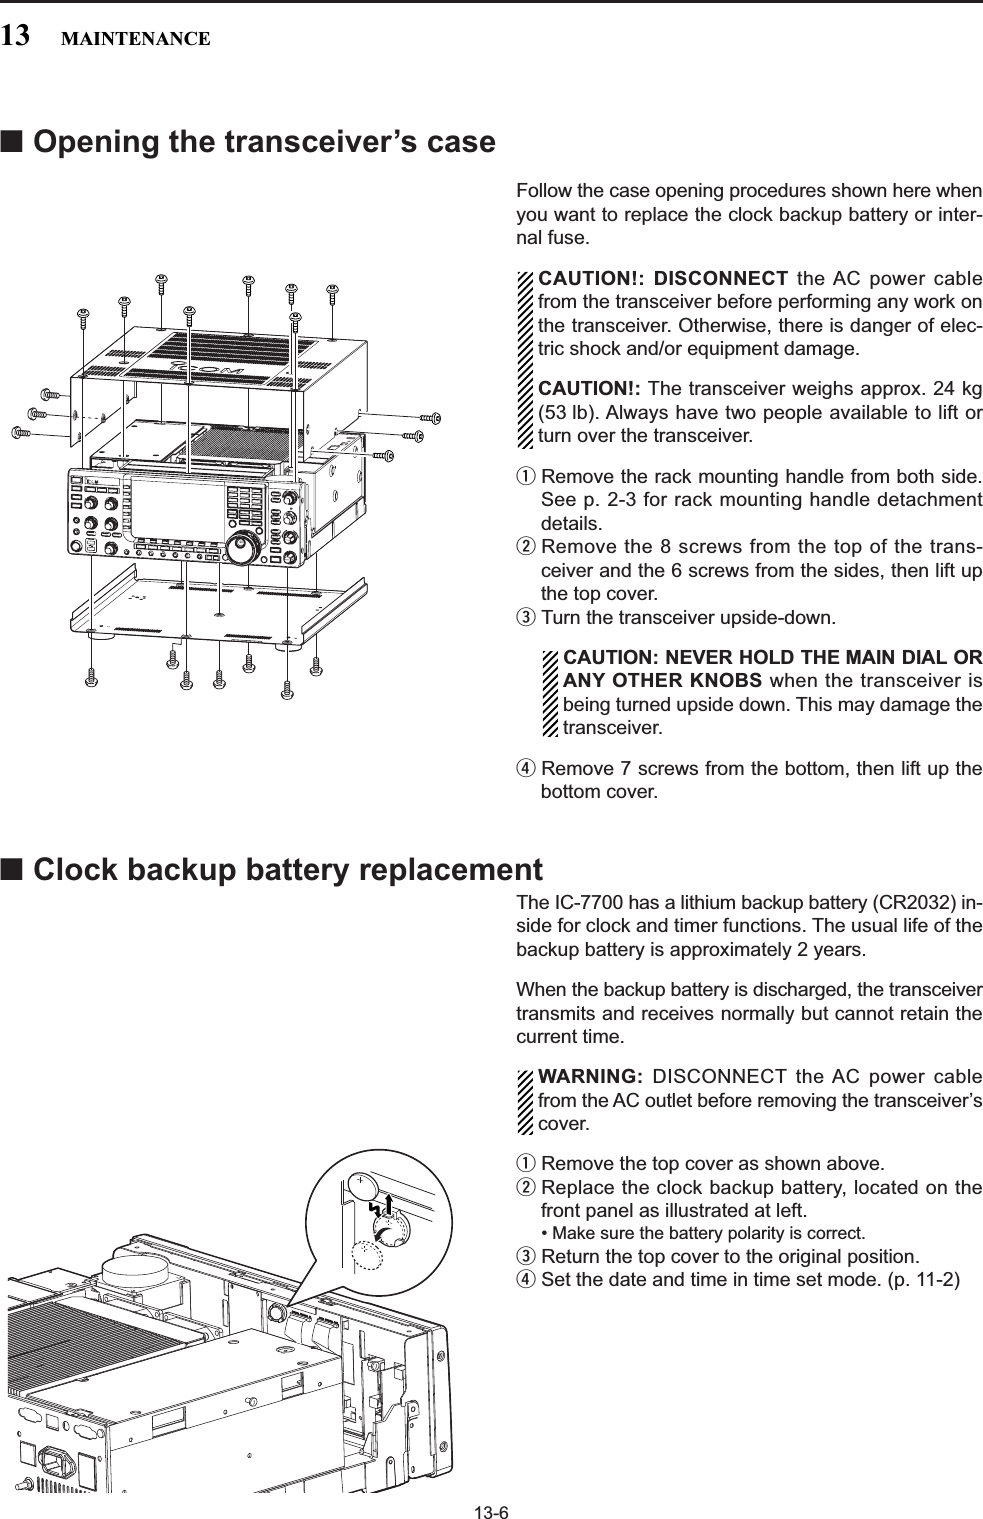 13-6■Opening the transceiver’s caseFollow the case opening procedures shown here whenyou want to replace the clock backup battery or inter-nal fuse.CAUTION!: DISCONNECT the AC power cablefrom the transceiver before performing any work onthe transceiver. Otherwise, there is danger of elec-tric shock and/or equipment damage.CAUTION!: The transceiver weighs approx. 24 kg(53 lb). Always have two people available to lift orturn over the transceiver. qRemove the rack mounting handle from both side.See p. 2-3 for rack mounting handle detachmentdetails.wRemove the 8 screws from the top of the trans-ceiver and the 6 screws from the sides, then lift upthe top cover.eTurn the transceiver upside-down.CAUTION: NEVER HOLD THE MAIN DIAL ORANY OTHER KNOBS when the transceiver isbeing turned upside down. This may damage thetransceiver.rRemove 7 screws from the bottom, then lift up thebottom cover.■Clock backup battery replacementThe IC-7700 has a lithium backup battery (CR2032) in-side for clock and timer functions. The usual life of thebackup battery is approximately 2 years.When the backup battery is discharged, the transceivertransmits and receives normally but cannot retain thecurrent time.WARNING: DISCONNECT the AC power cablefrom the AC outlet before removing the transceiver’scover.qRemove the top cover as shown above.wReplace the clock backup battery, located on thefront panel as illustrated at left.• Make sure the battery polarity is correct.eReturn the top cover to the original position.rSet the date and time in time set mode. (p. 11-2)13 MAINTENANCE